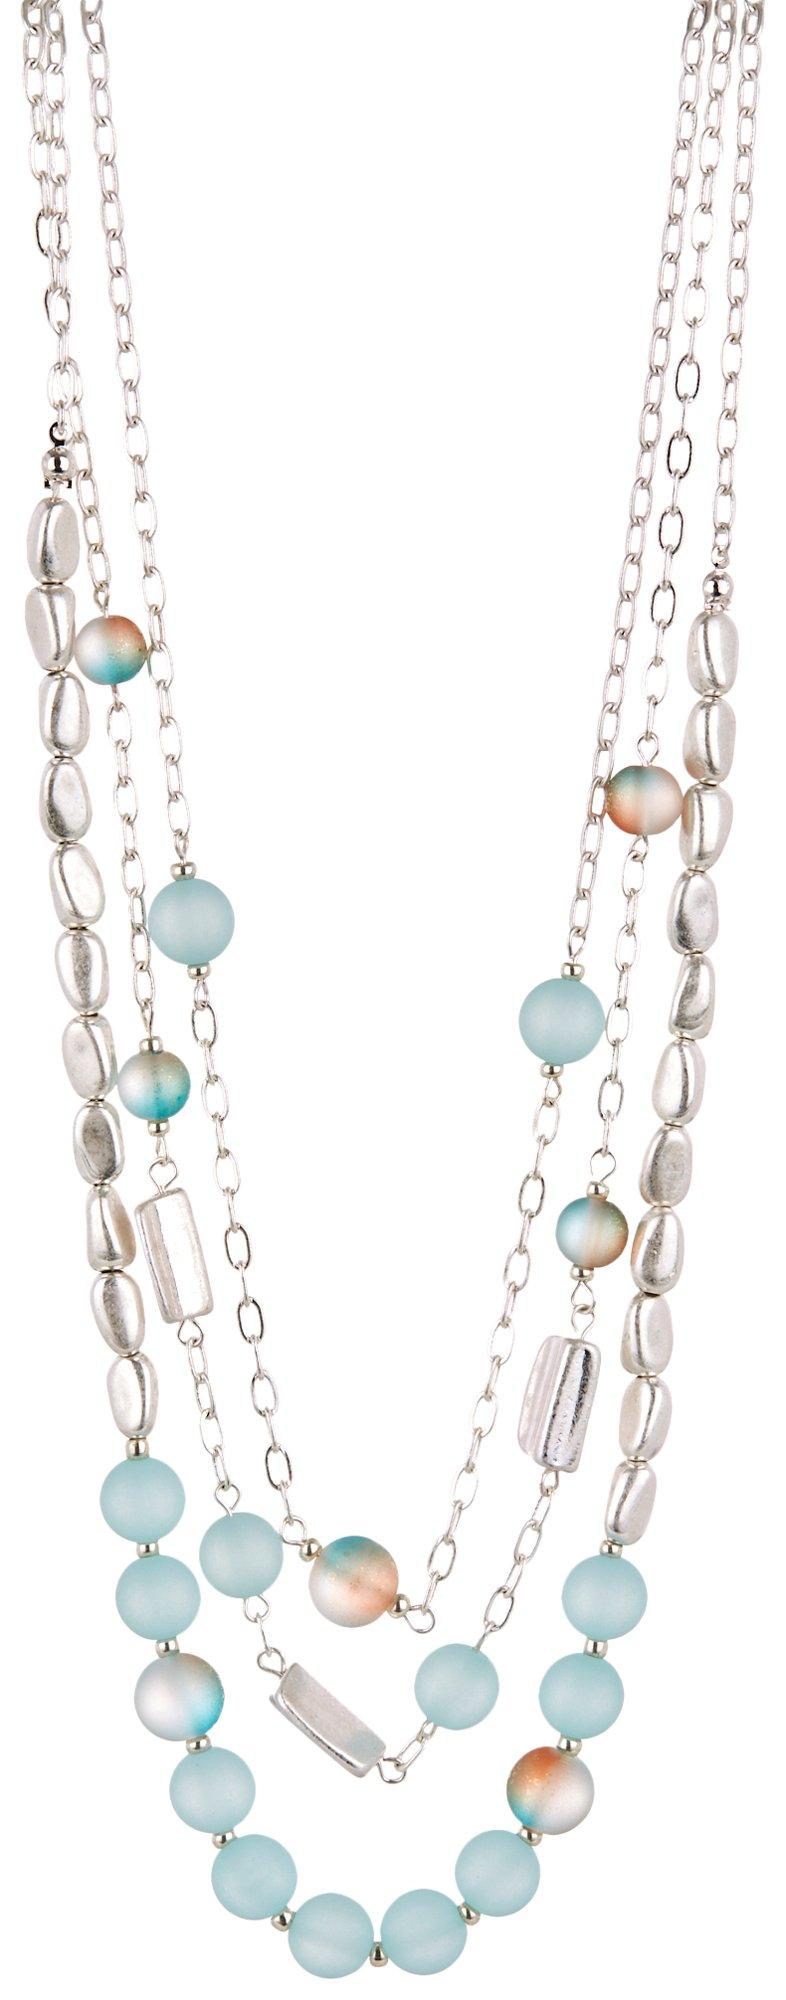 3-Row 20 In. Beaded Necklace